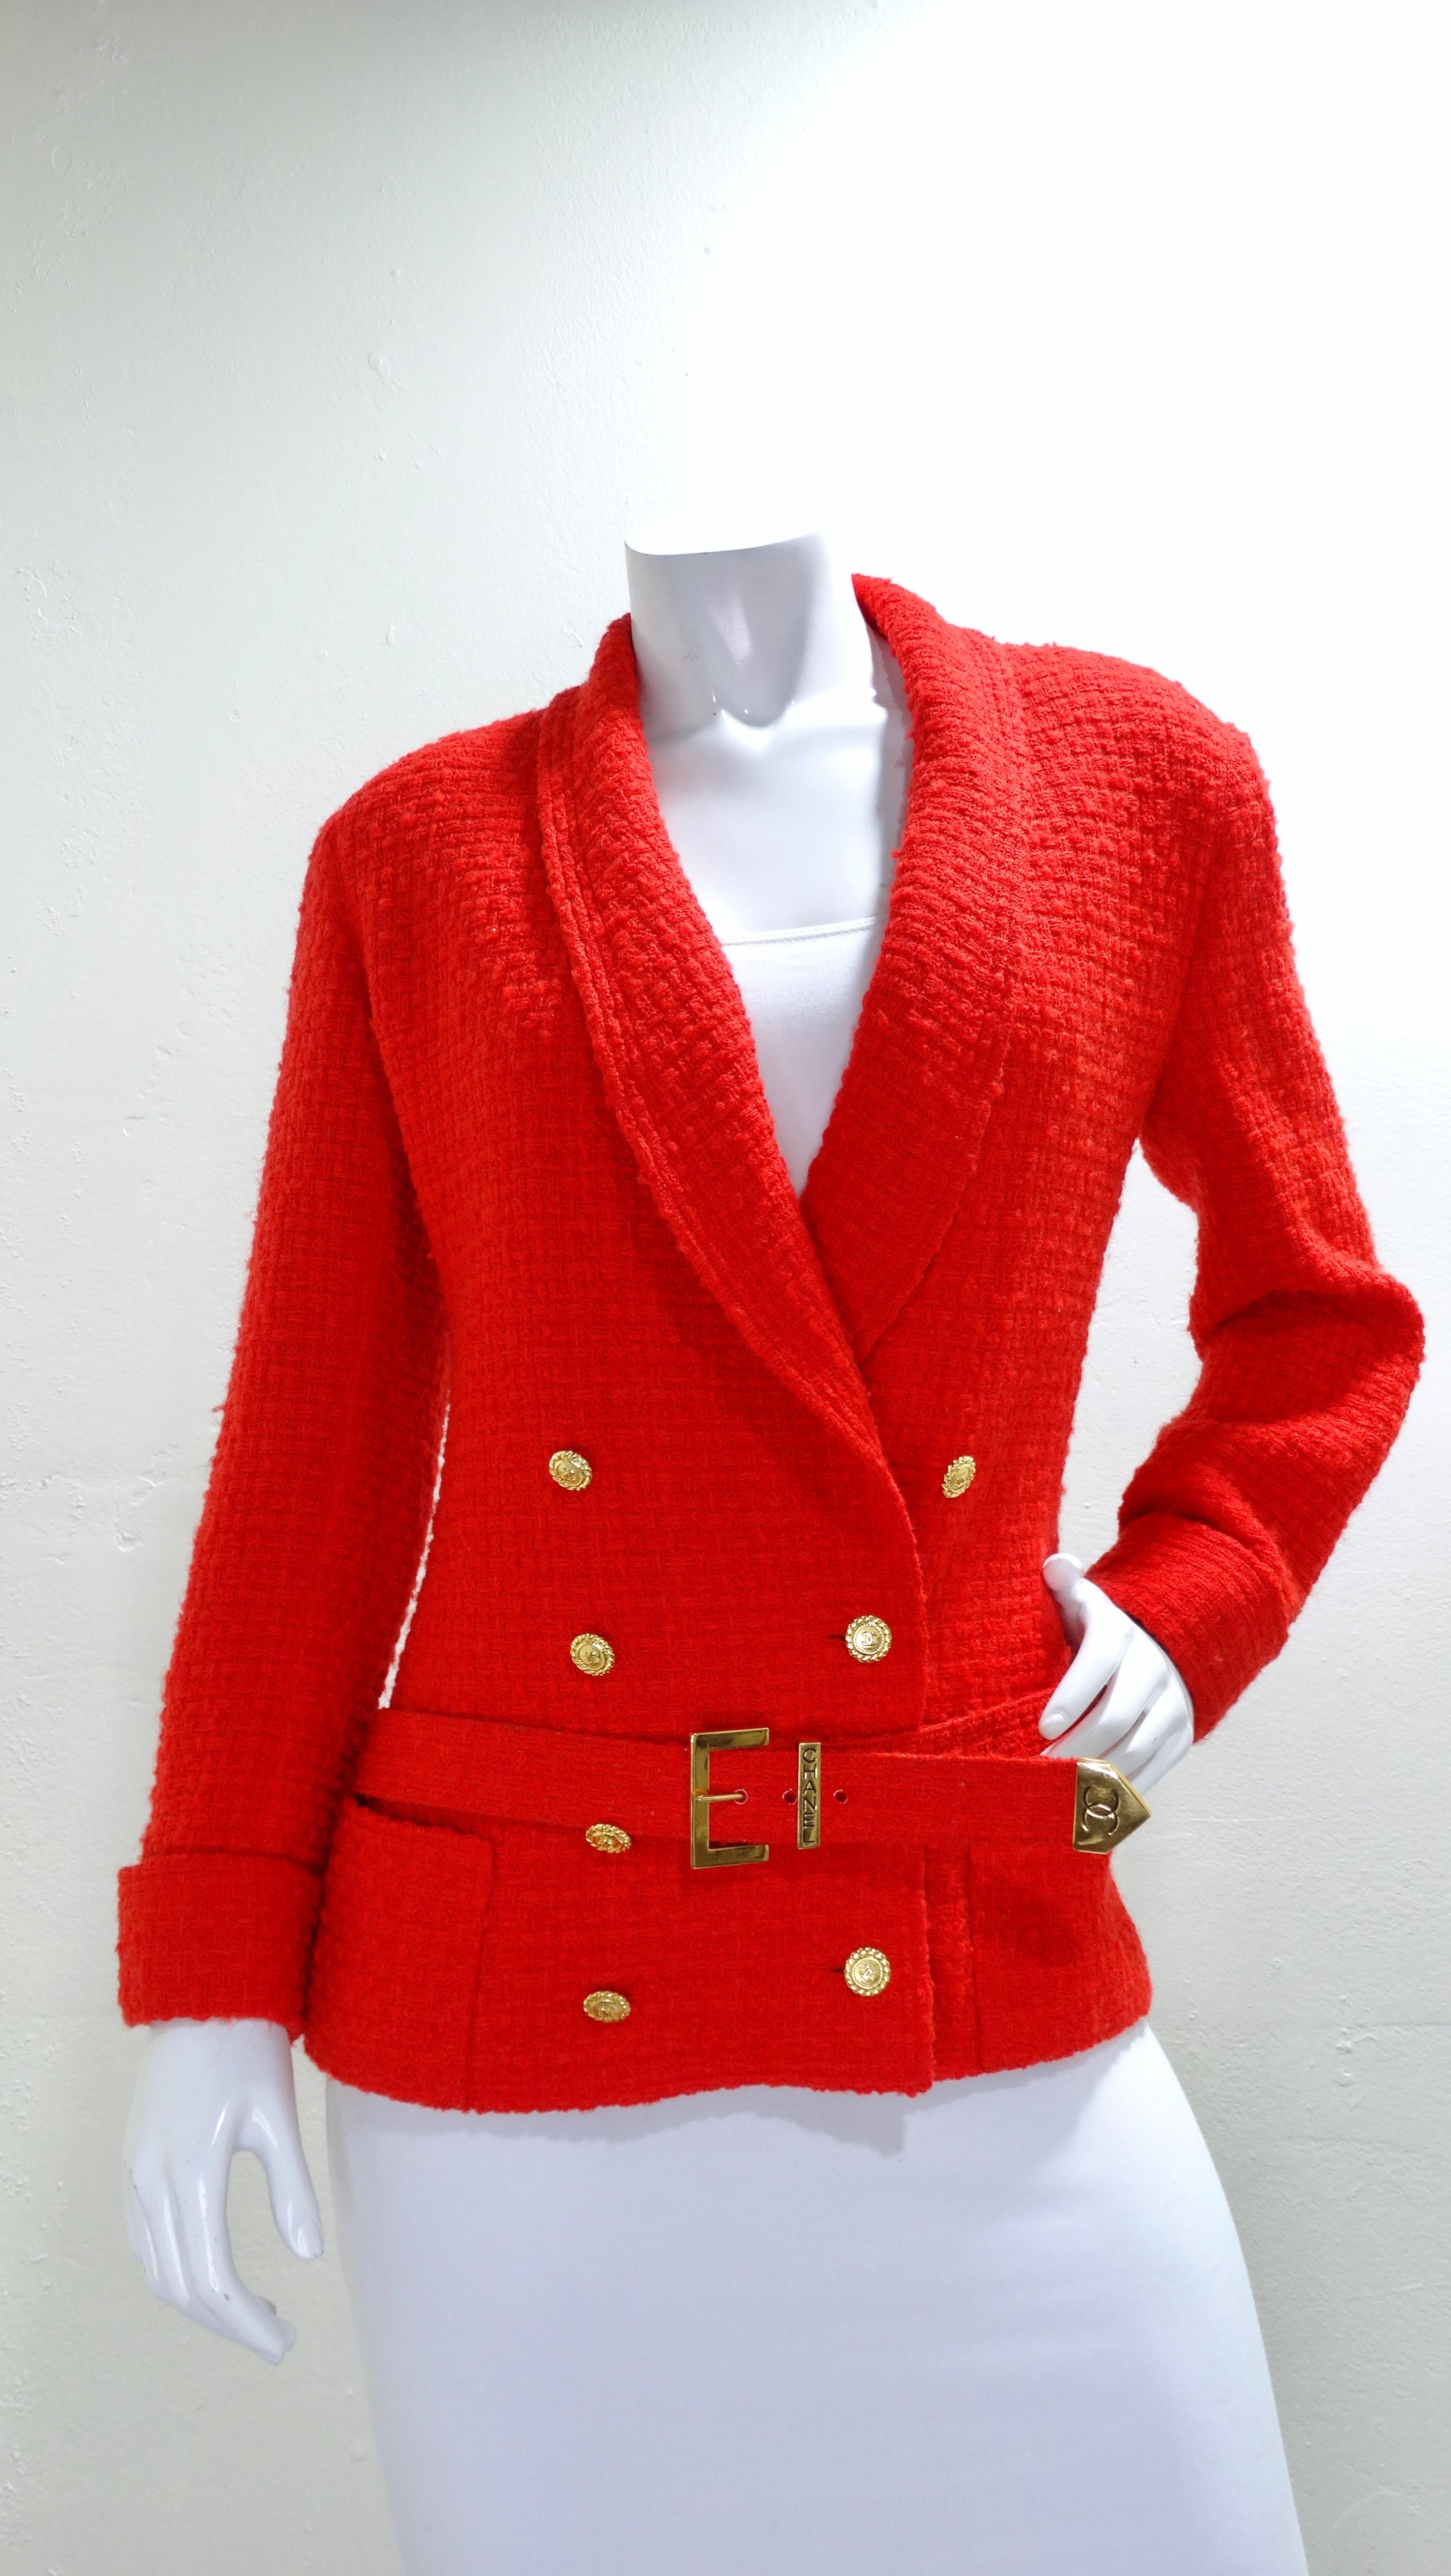 ***Matching blazer available on separate posting***

Chanel but make it RED HOT! Take a piece of history with this rare and detailed belt. This highly textured belt is made of red mohair and wool with golden metal hardware that includes both